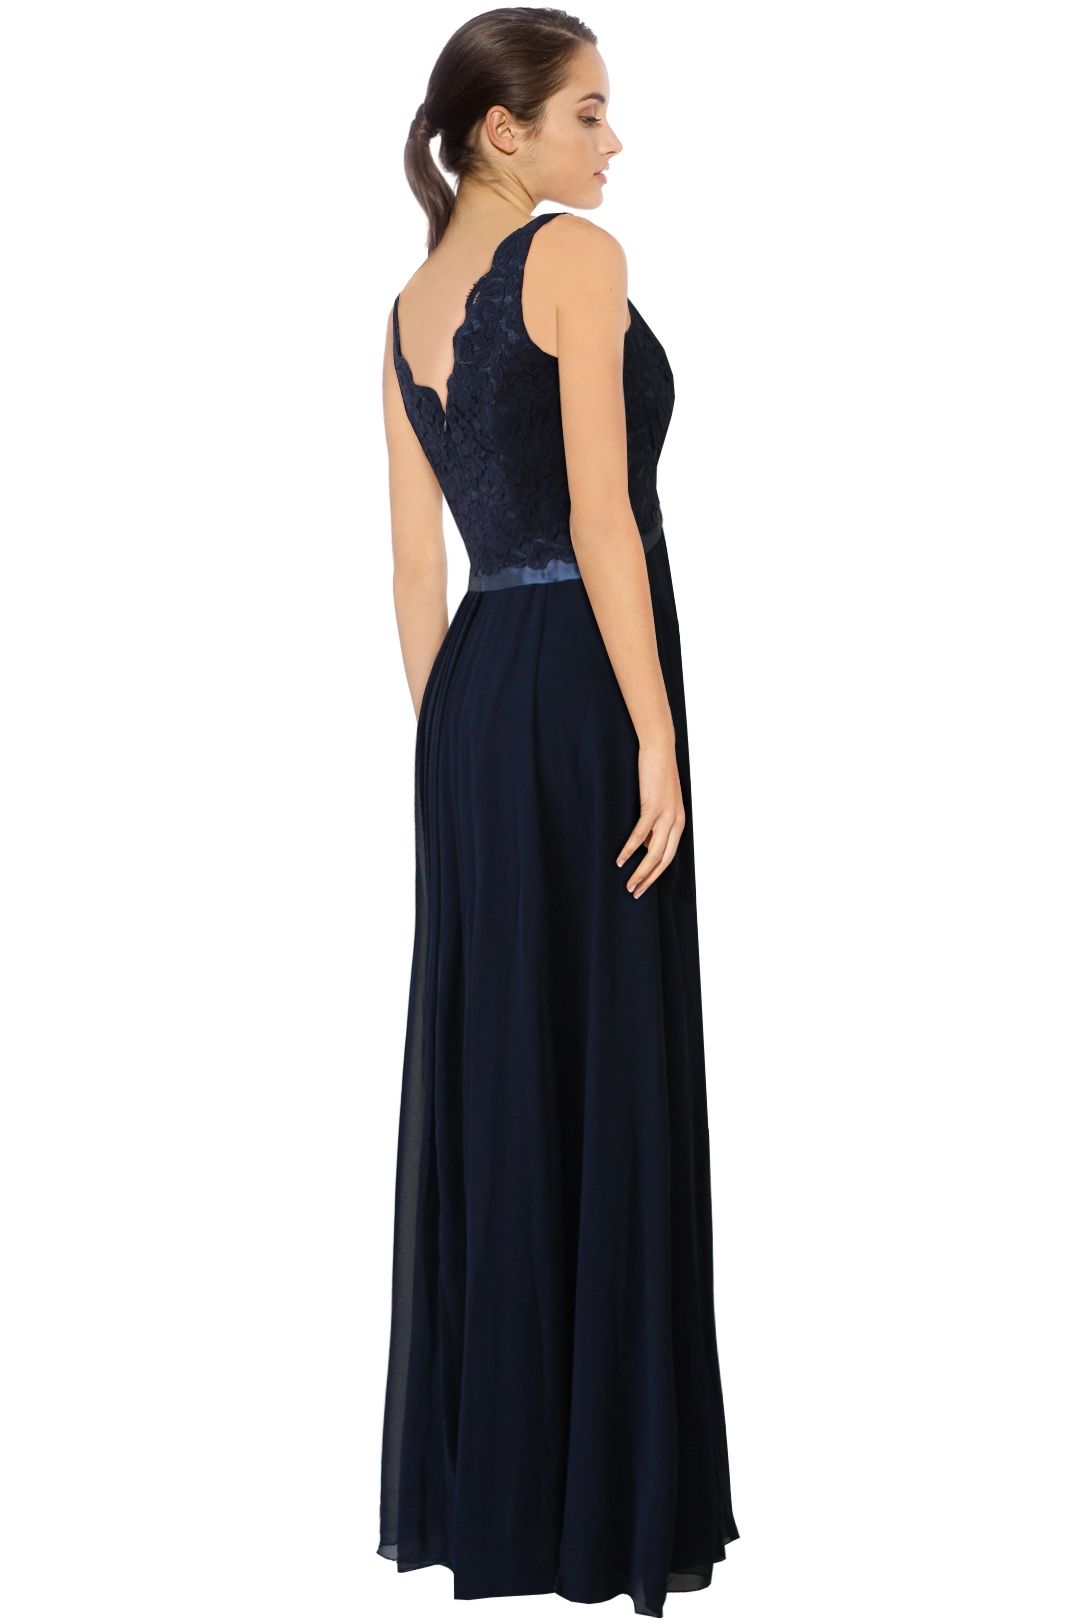 The Dress Shoppe - Share This Elegance - Navy - Back